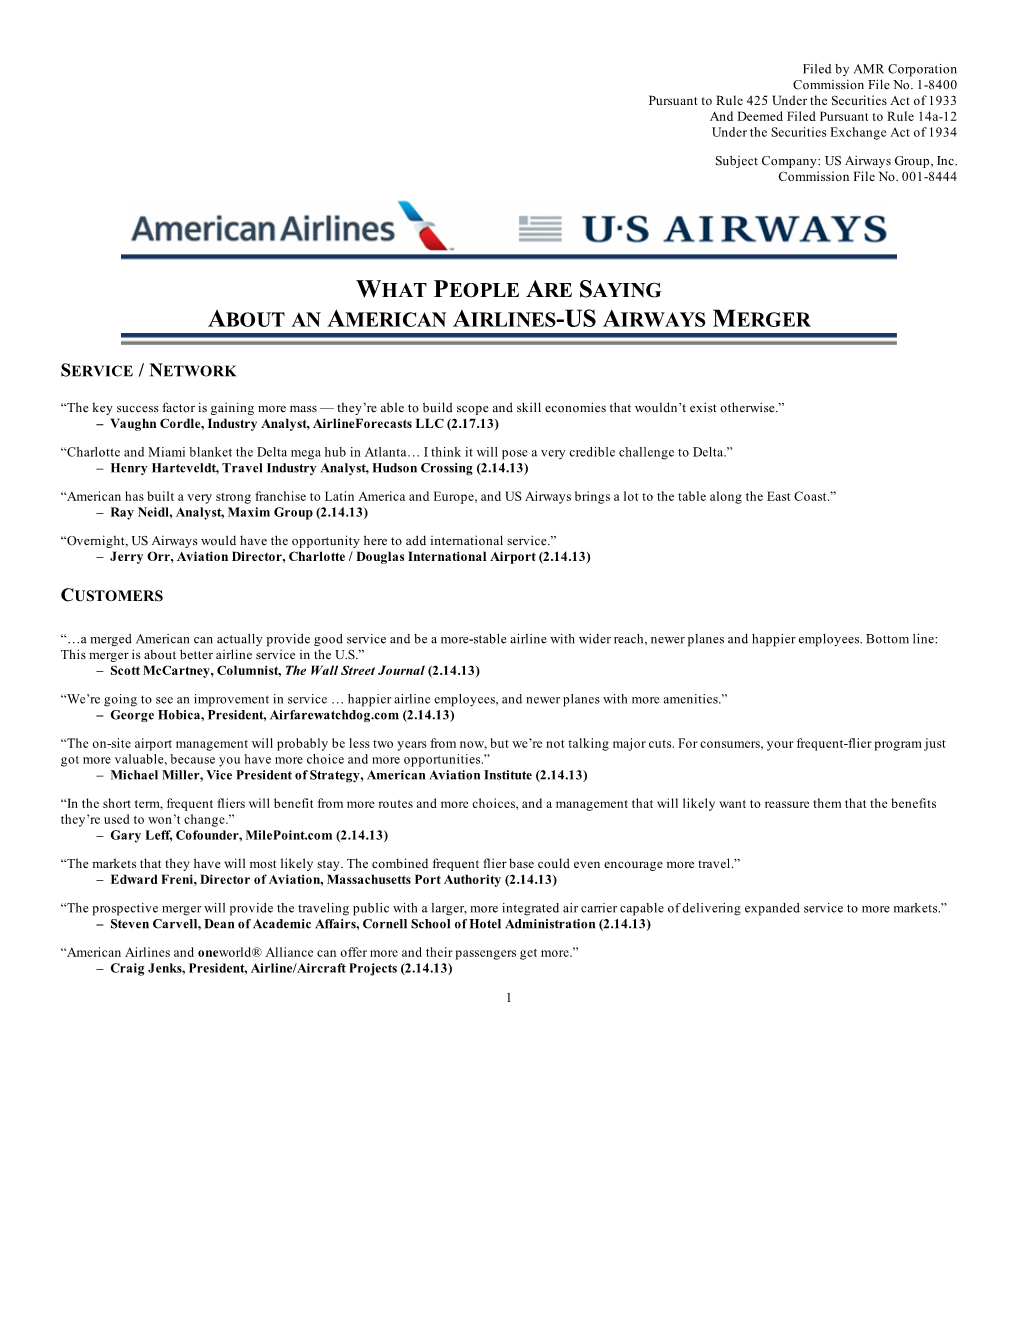 What People Are Saying About an American Airlines-Us Airways Merger